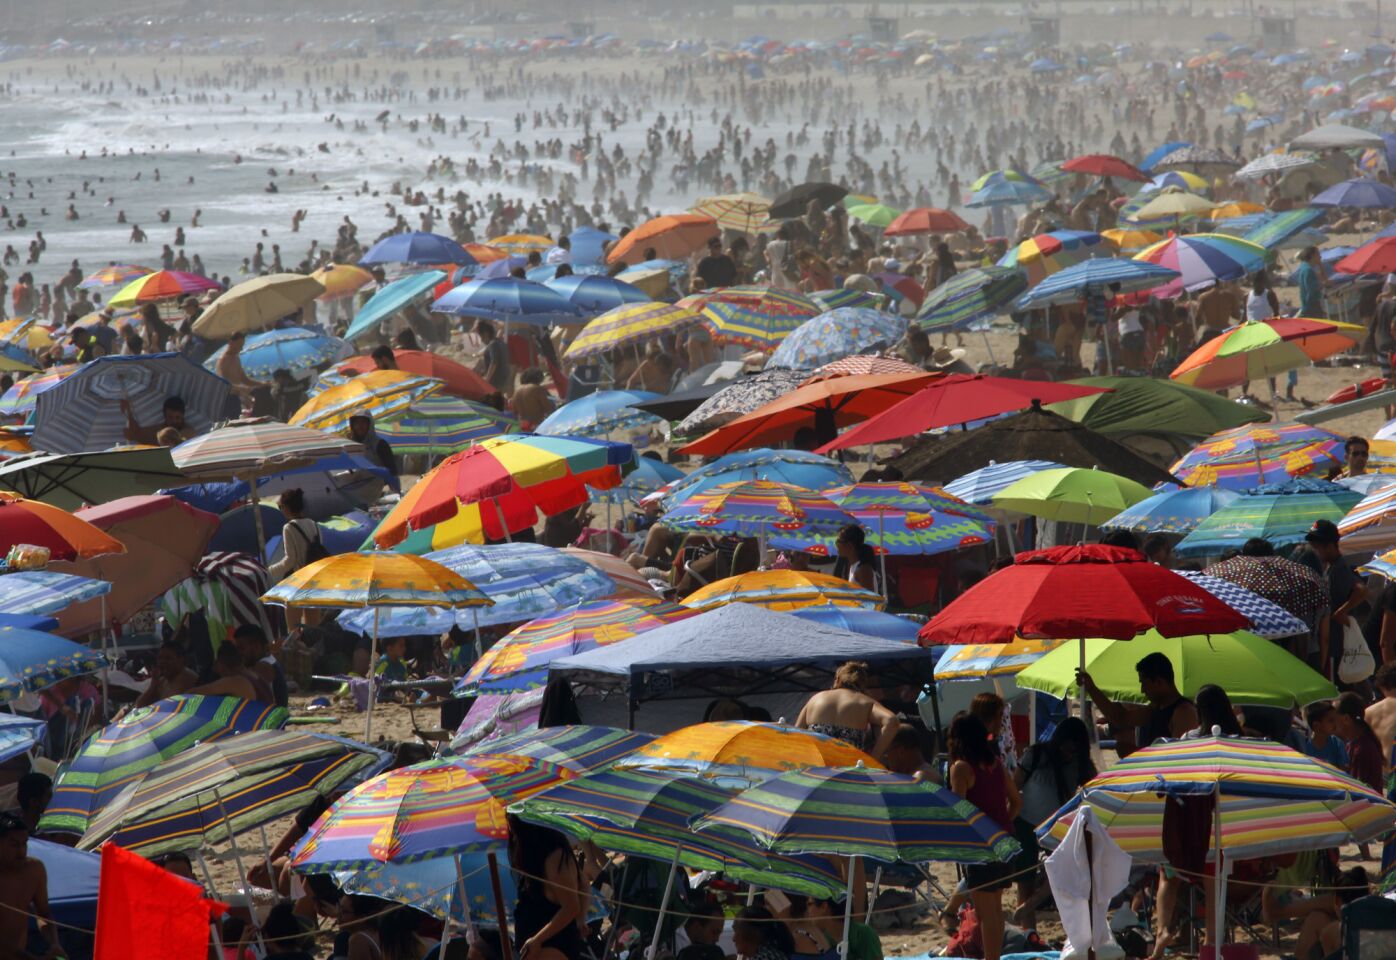 Hundreds of people seek relief from the hot weather in the surf Sunday along the Santa Monica Pier.